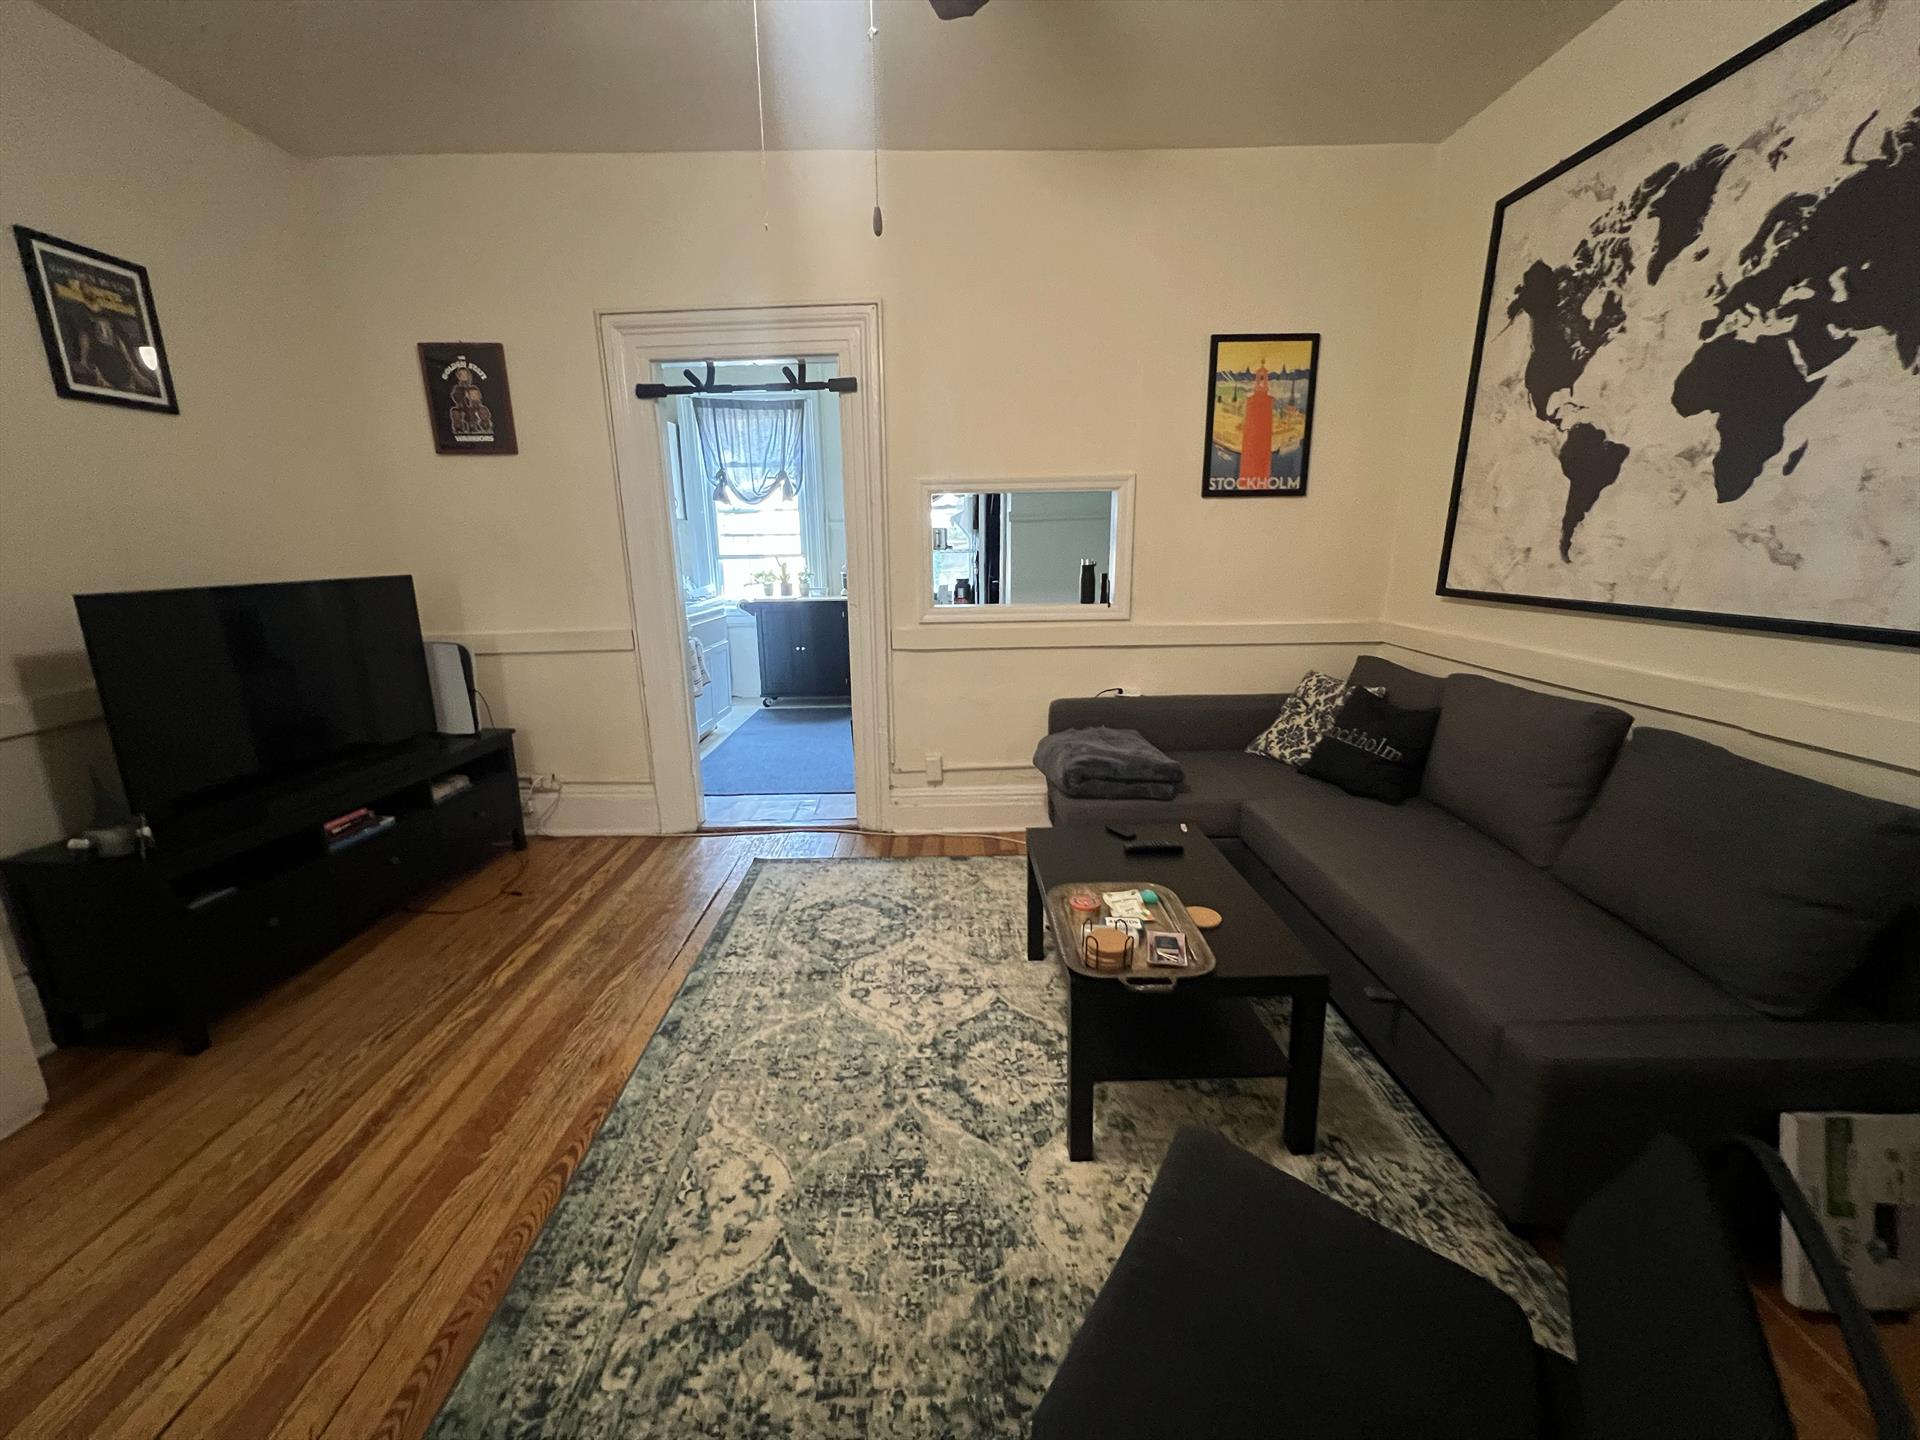 Fantastic deal 1 bed 1 bath apartment located on desirable Bloomfield street! This home features hardwood floors, a good size living area and good light. Lots of closet space. Sorry no pets. Laundry in building. Available 11/1/23. broker fee of 10% of annual rent paid by tenant. 